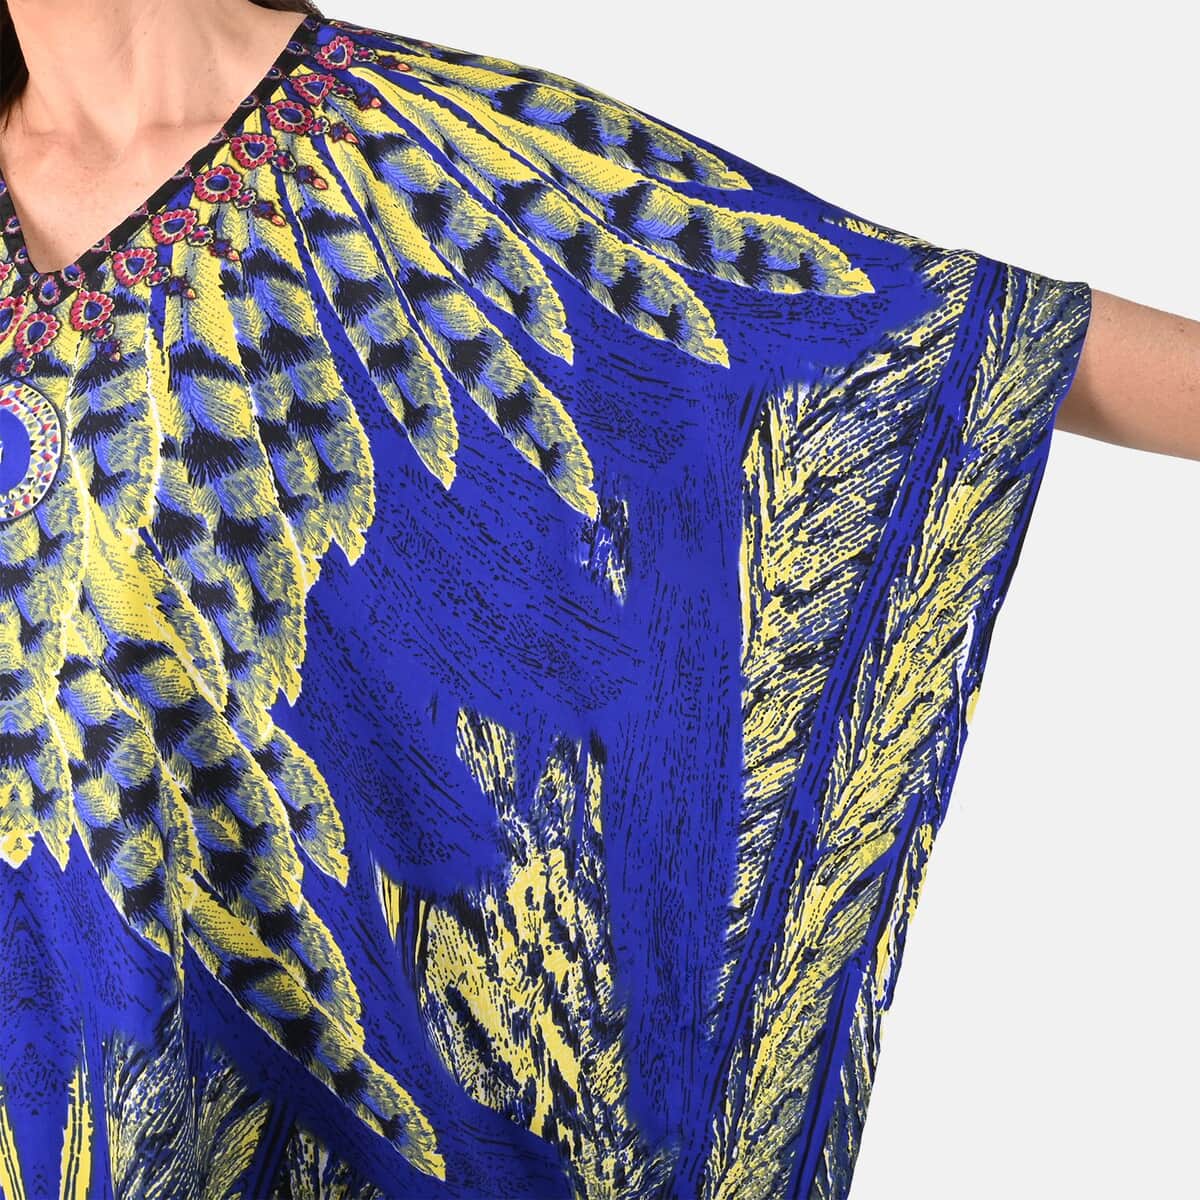 TAMSY Blue Feather Screen Printed Short Kaftan - One Size Fits Most (36"x41") image number 4